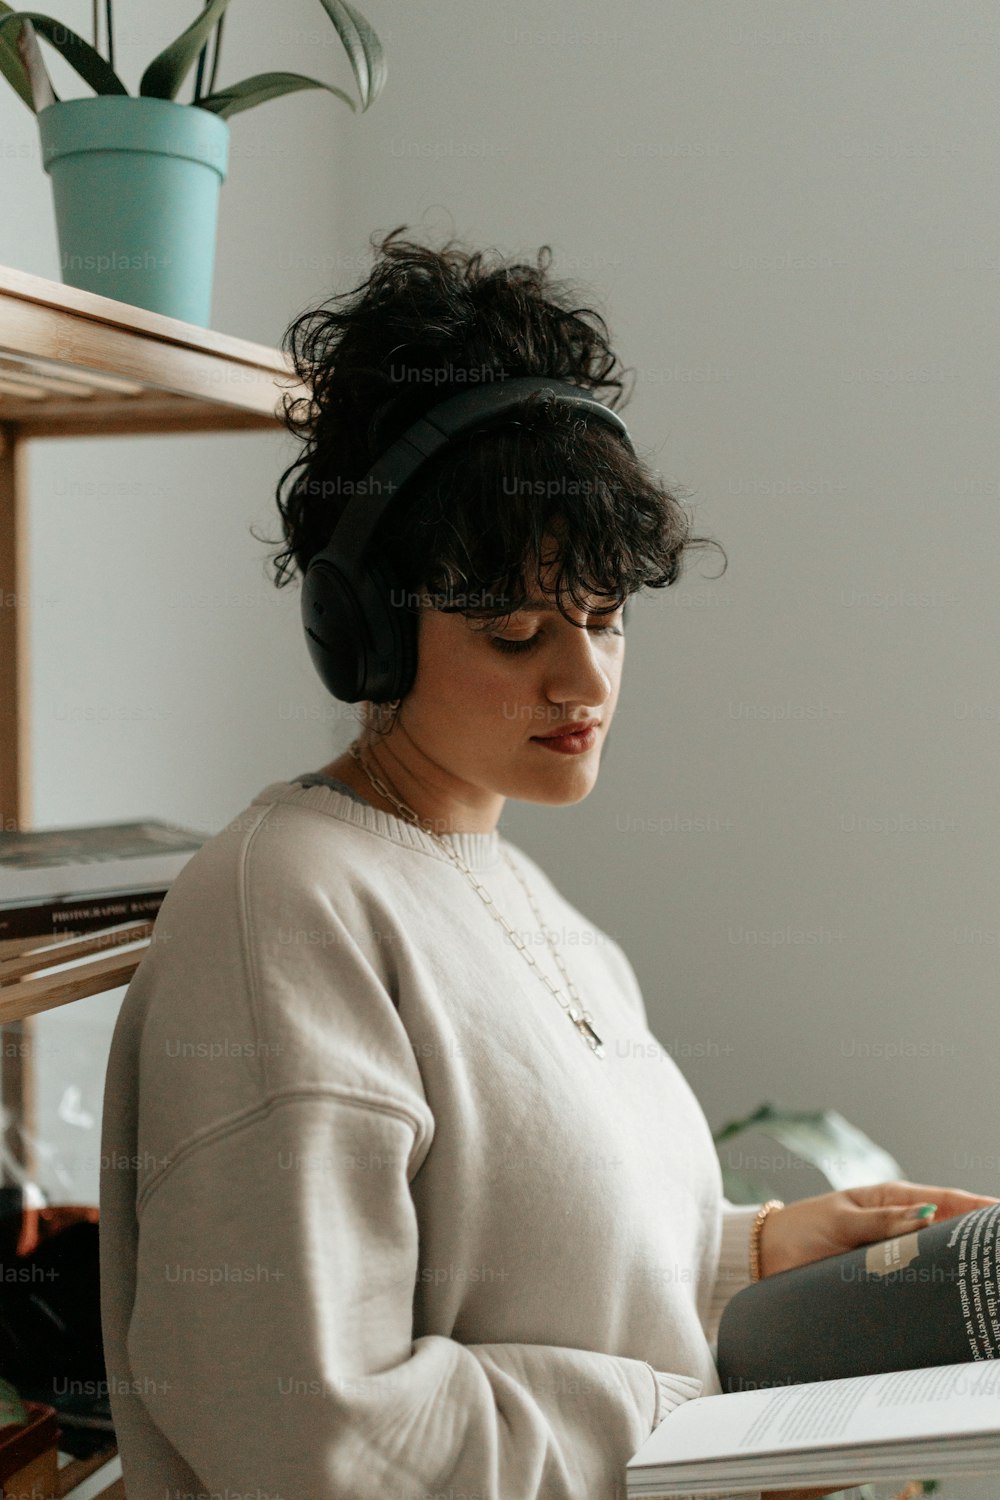 a woman wearing headphones and reading a book